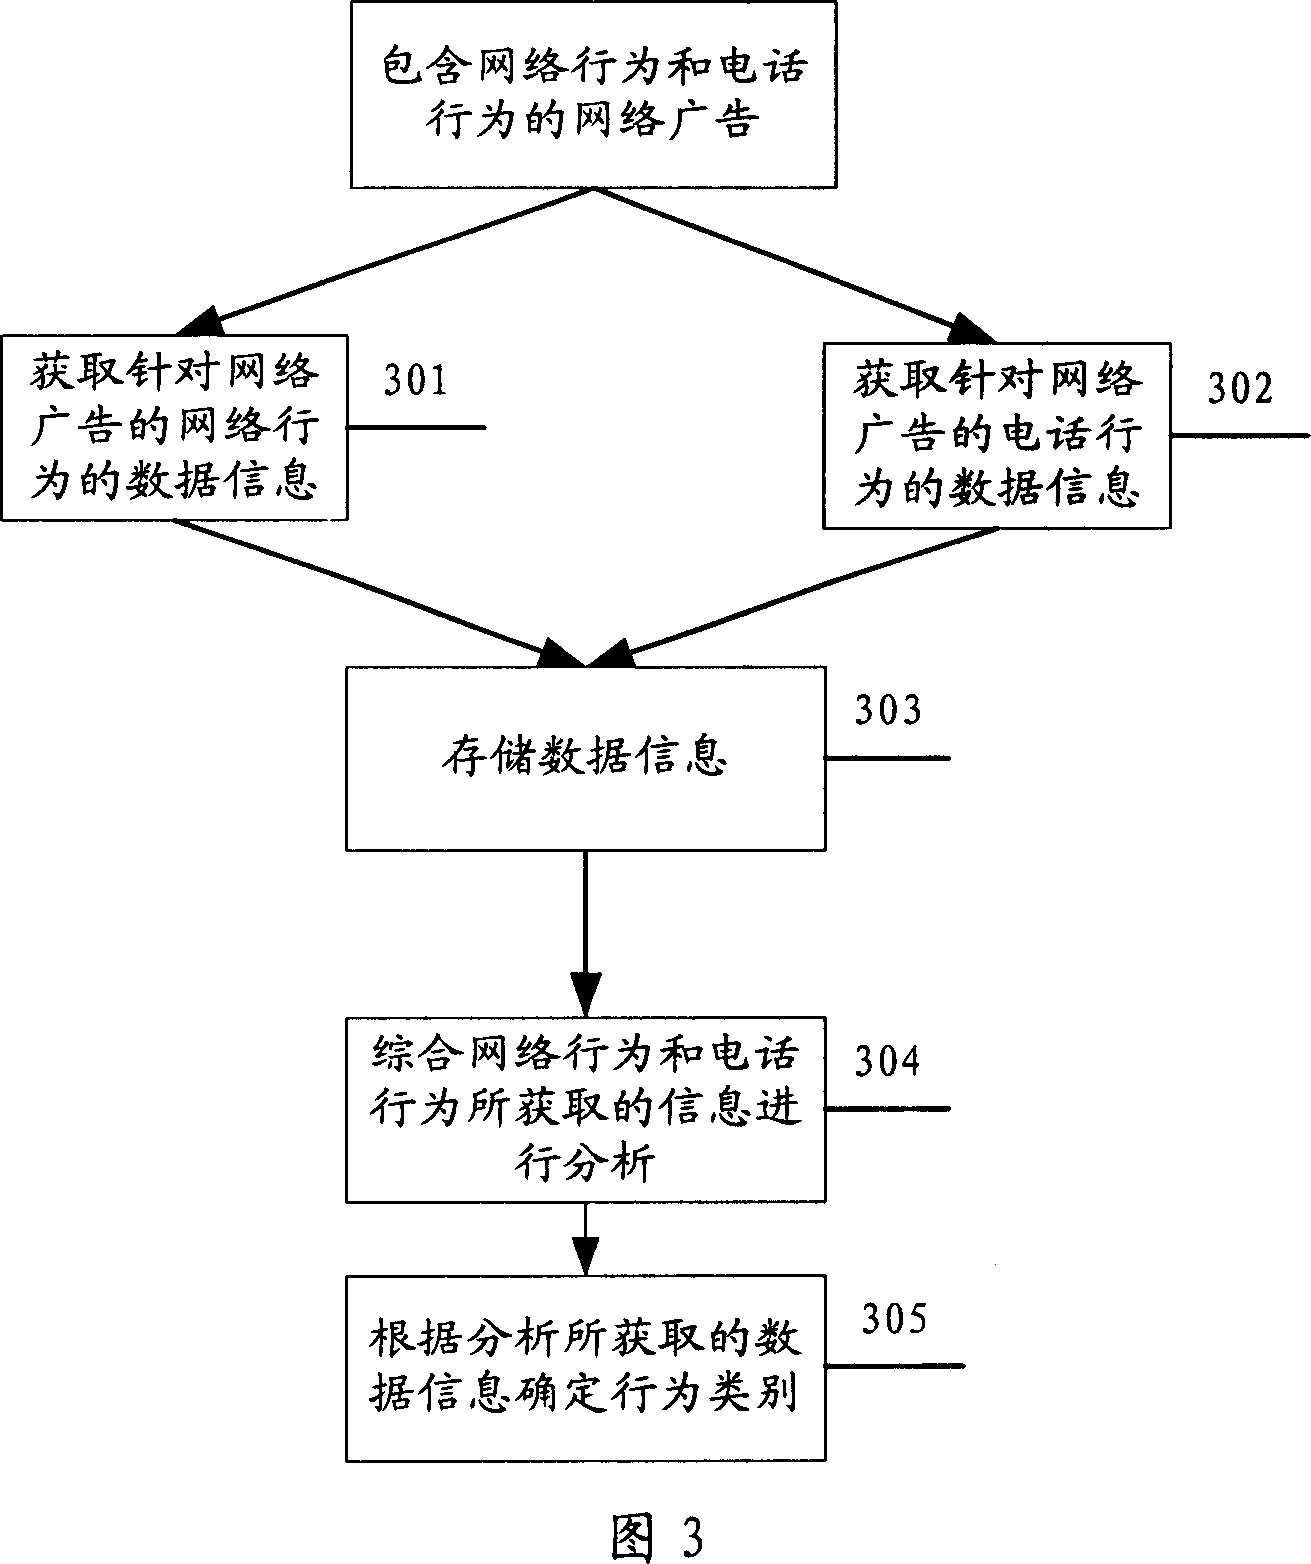 Method and apparatus for obtaining and analyzing data information aimed at data object